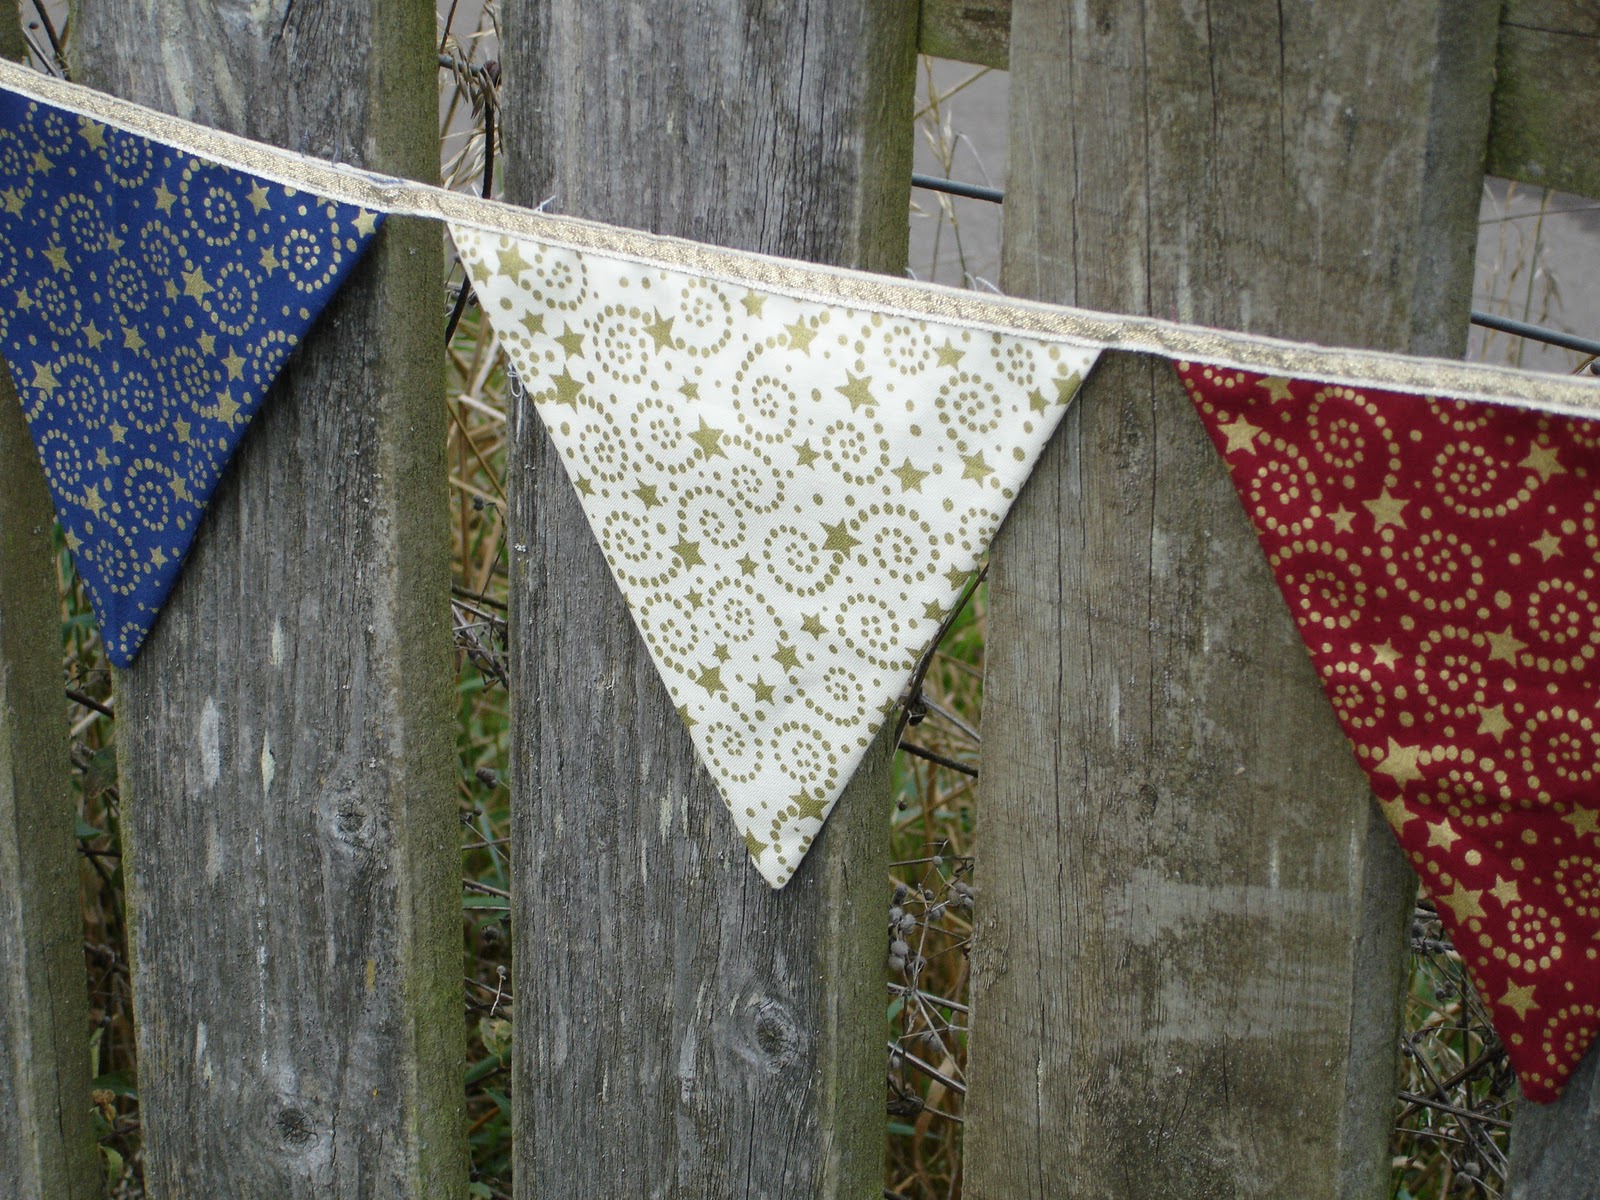 Canadian Abroad: Bunting Galore